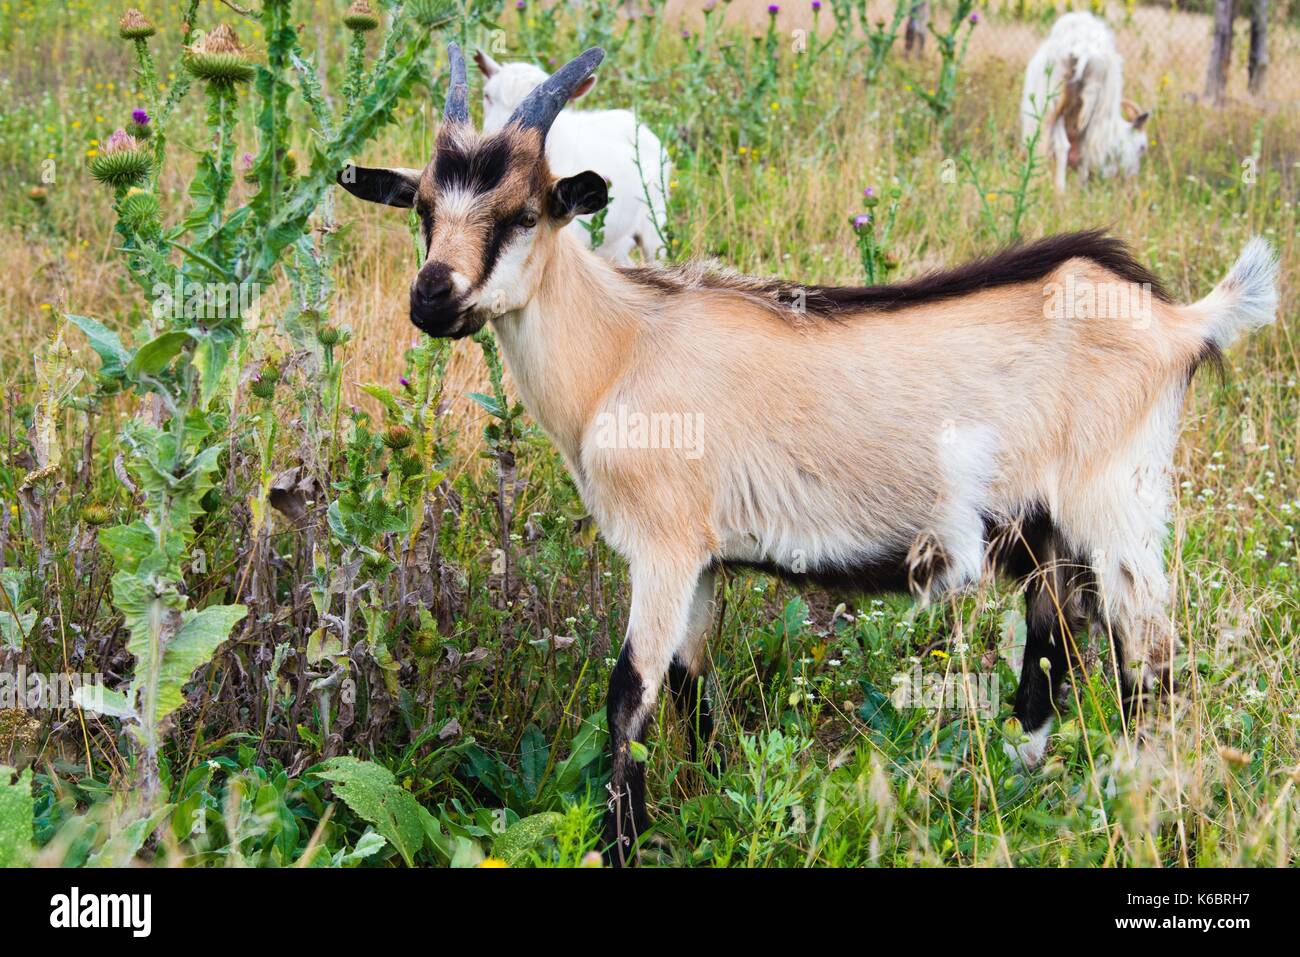 Kinder goat eats. The Kinder goat stands in the field. Stock Photo